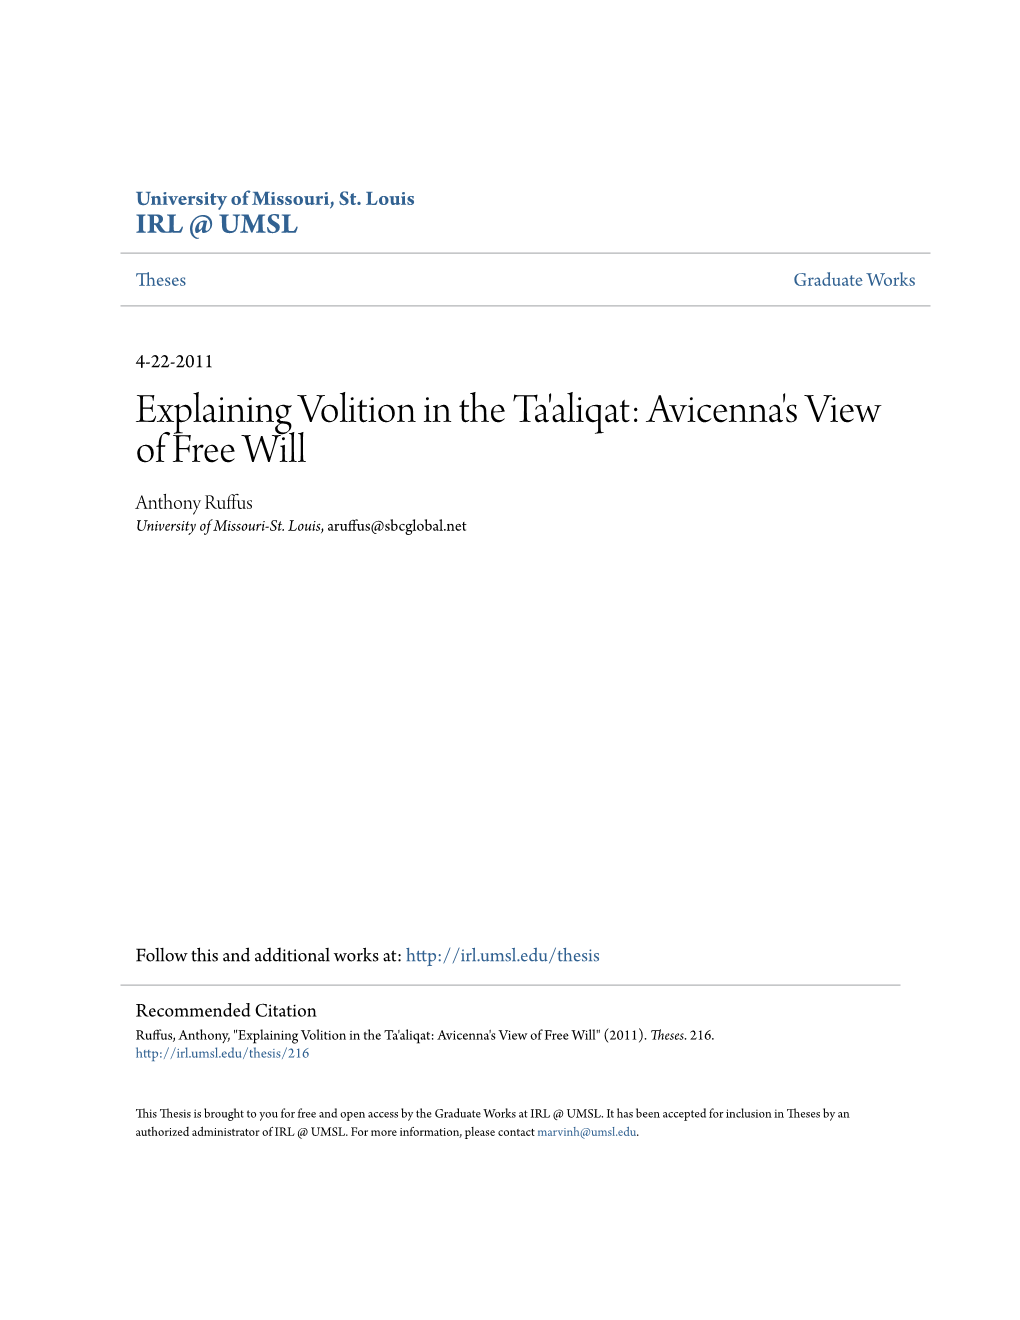 Explaining Volition in the Ta'aliqat: Avicenna's View of Free Will Anthony Ruffus University of Missouri-St